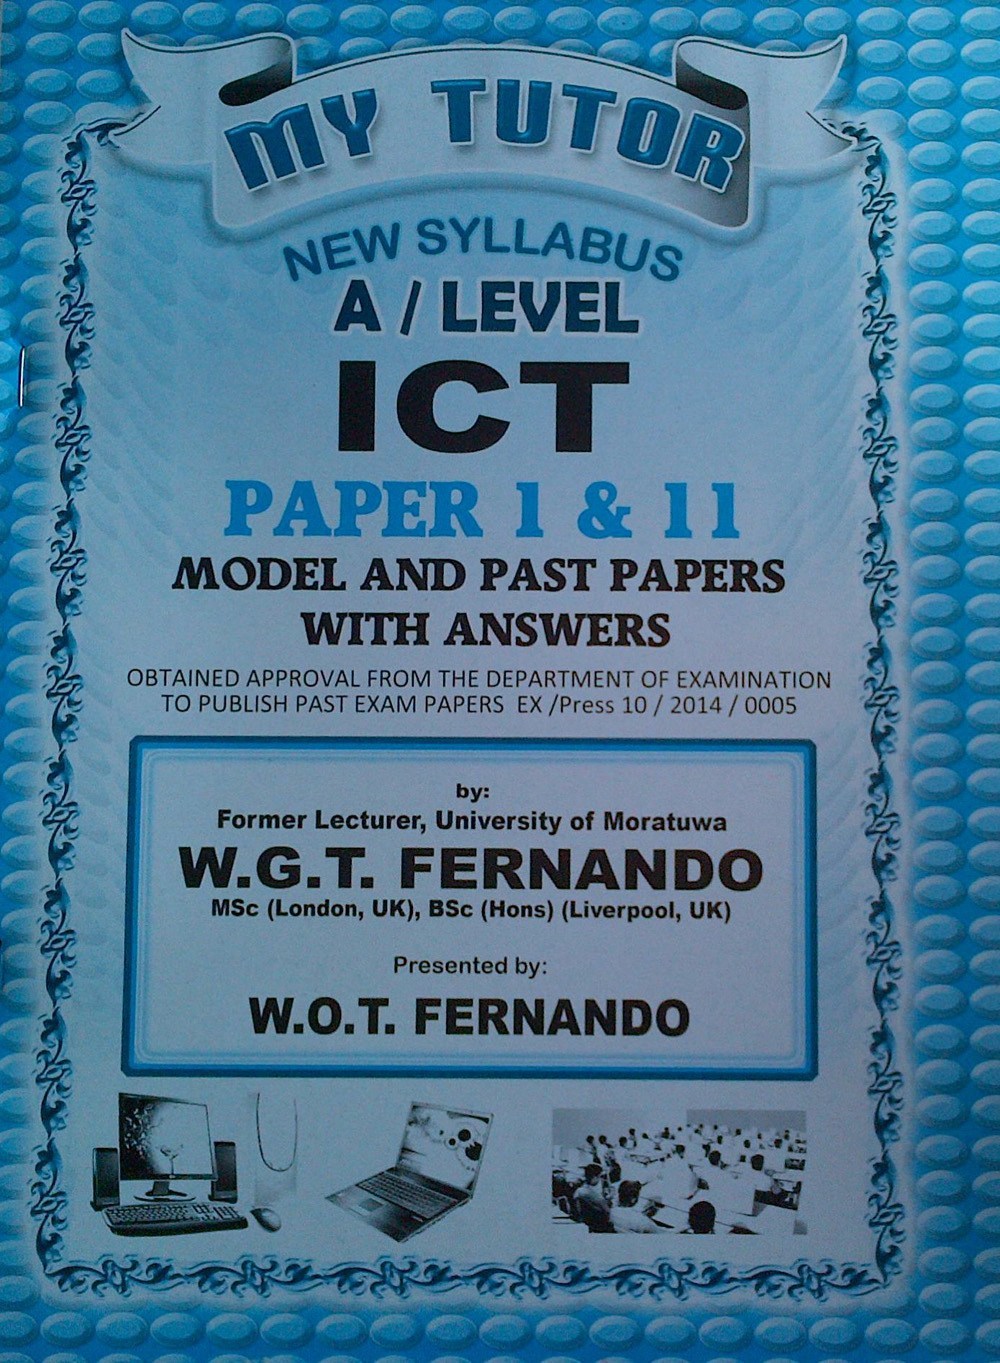 My Tutor New Syllabus A/Level ICT Paper 1 and 2 Model and Past Papers With Answers